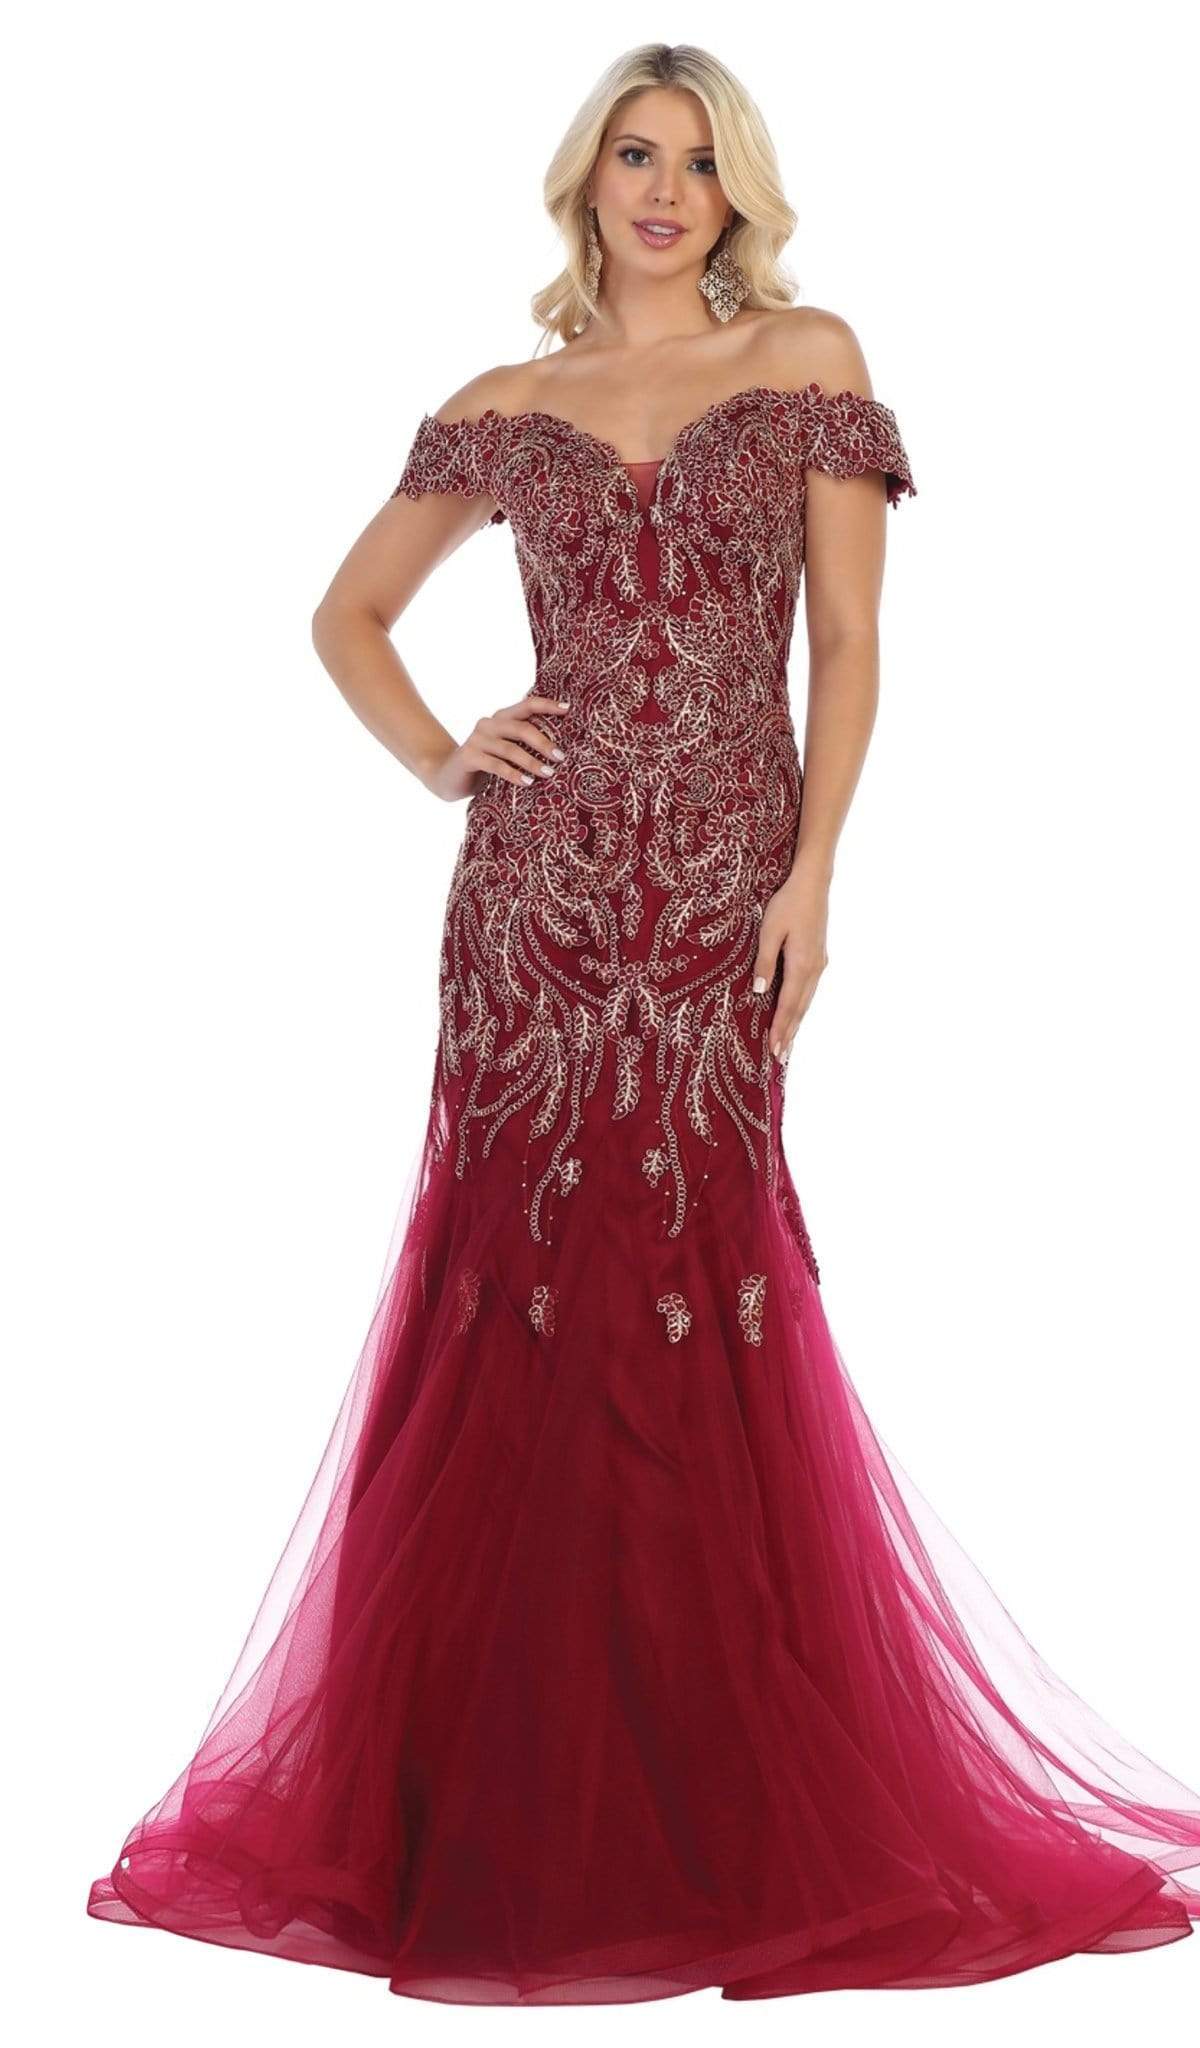 May Queen - RQ7705 Foliage Appliqued Plunging Off Shoulder Gown Evening Dresses 4 / Burgundy